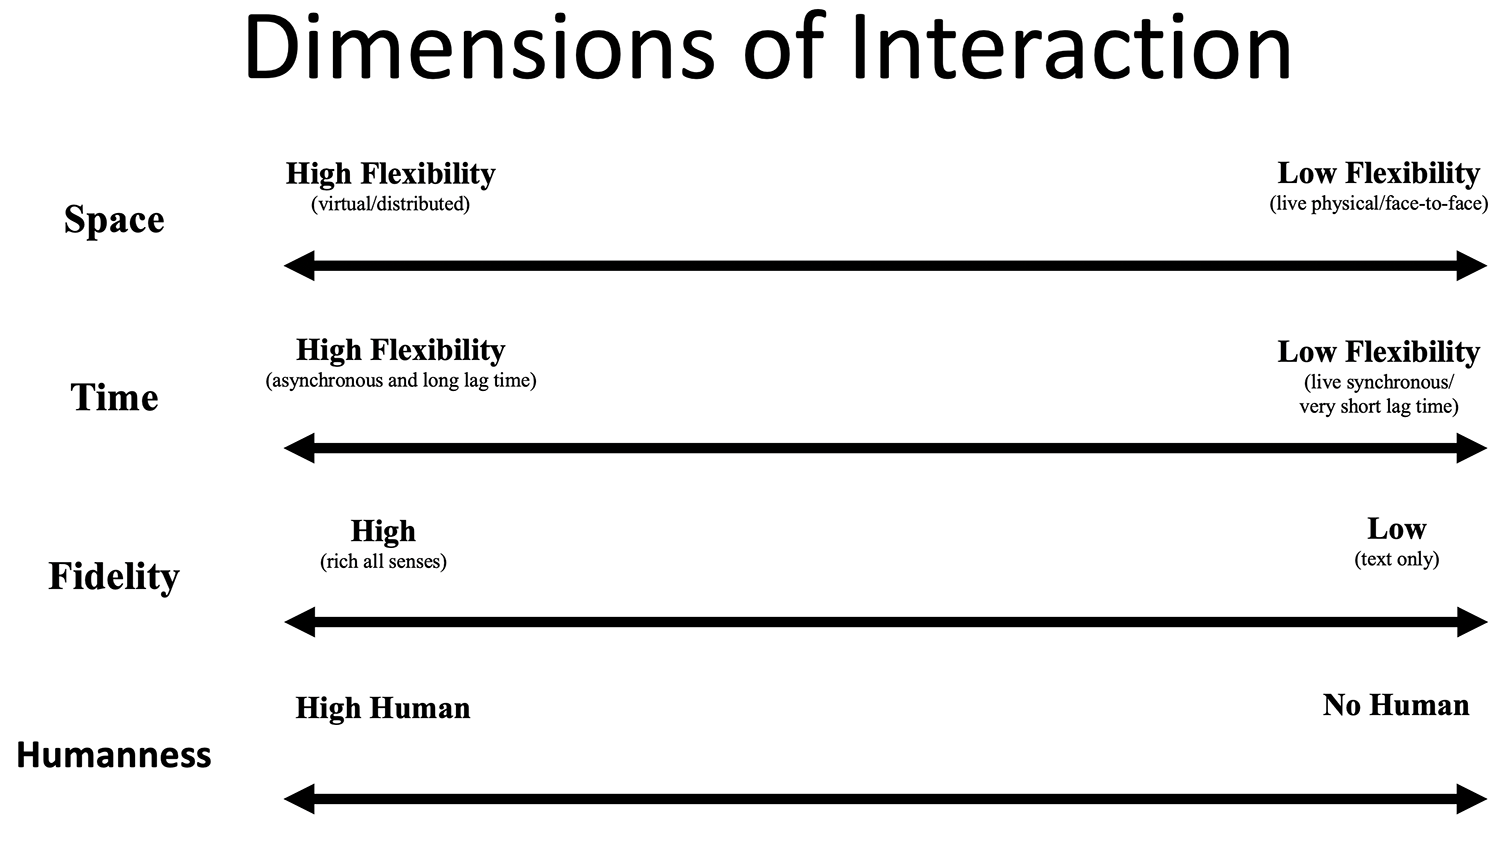 Title: Dimensions of Interaction. 4 lines with arrows at each end. Space: High Flexibility (virtual/distributed) to Low Flexibility (live physical/face-to-face). Time: High Flexibility (asynchronous and long lag time) to Low Flexibility (live synchronous/very short lag time). Fidelity: High (rich all senses) to Low (text only). Humanness: High Human to No Human.